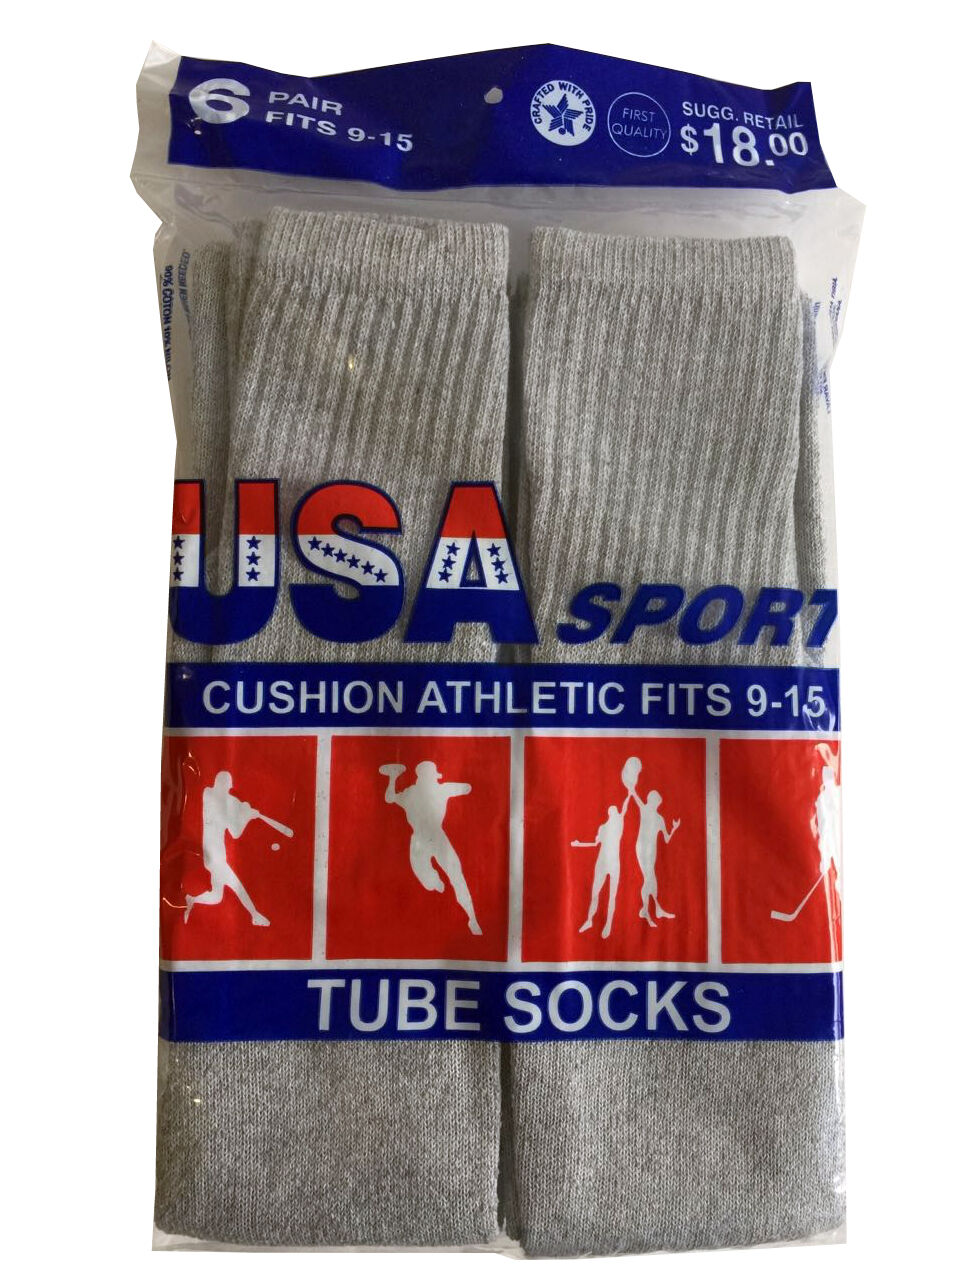 WOMEN'S COTTON TUBE SOCKS, REFEREE STYLE, SIZE 9-15 SOLID GREY